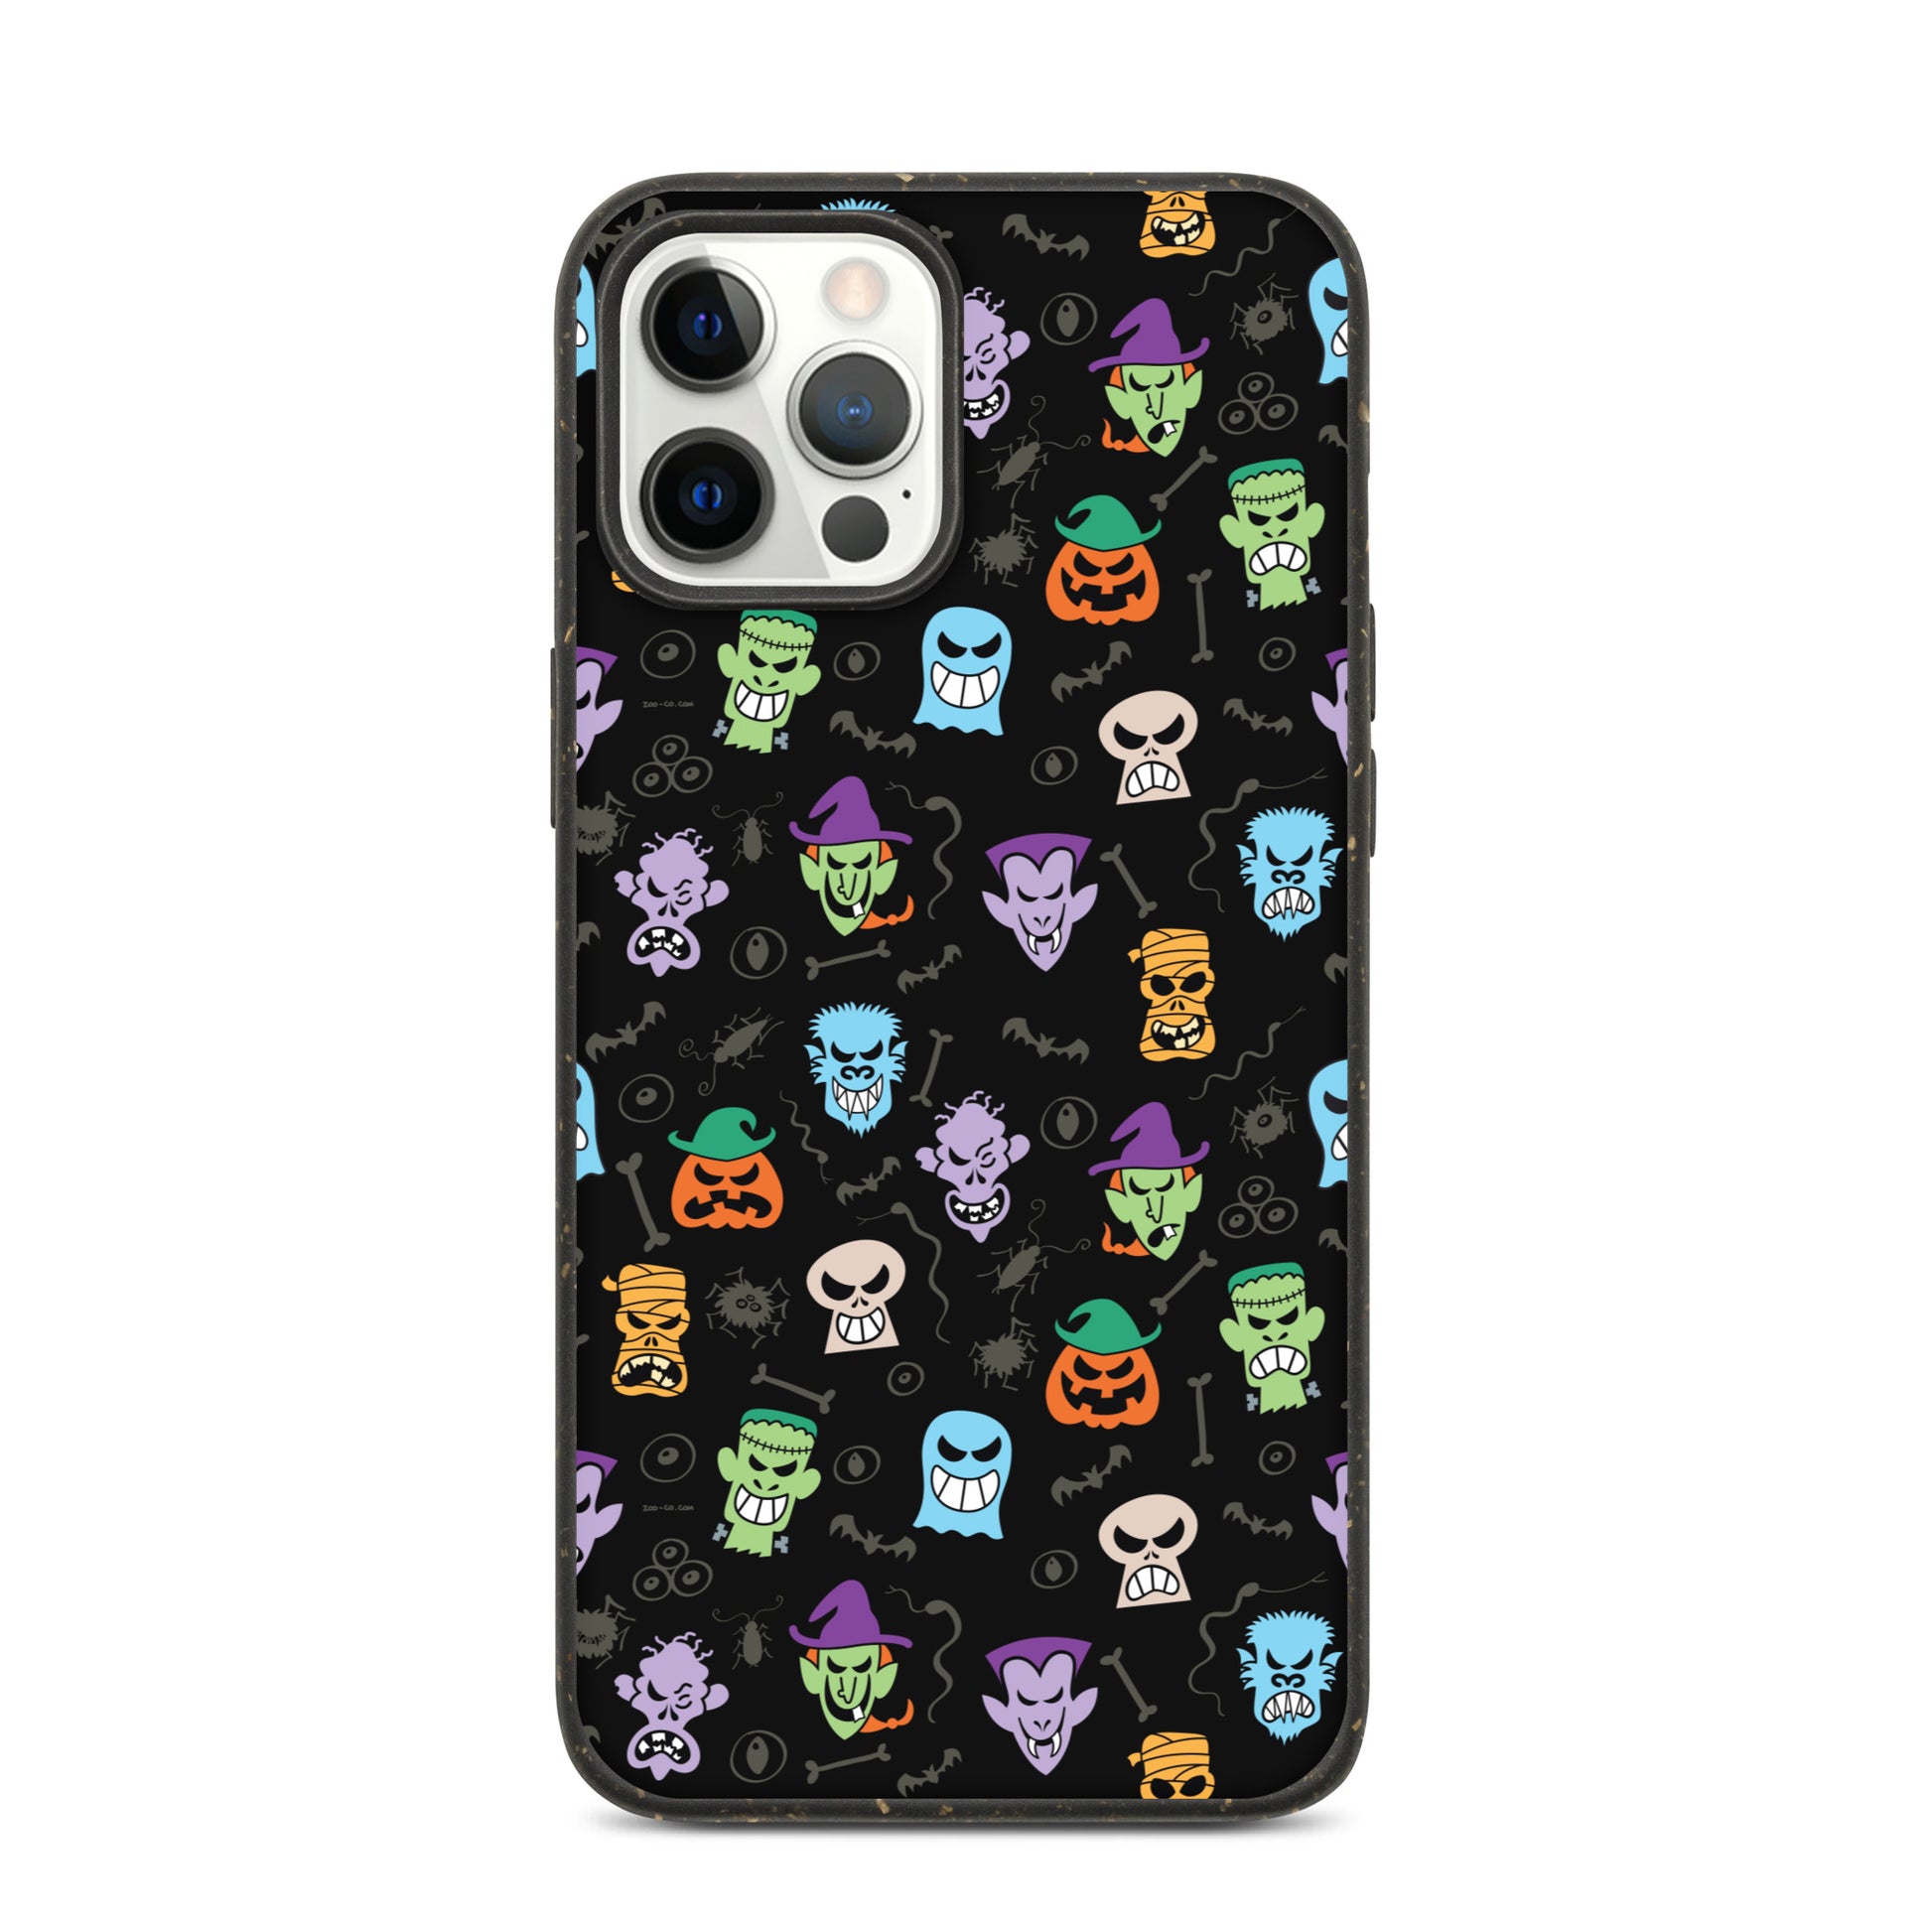 Scary Halloween faces Speckled iPhone case. iPhone 12 pro max